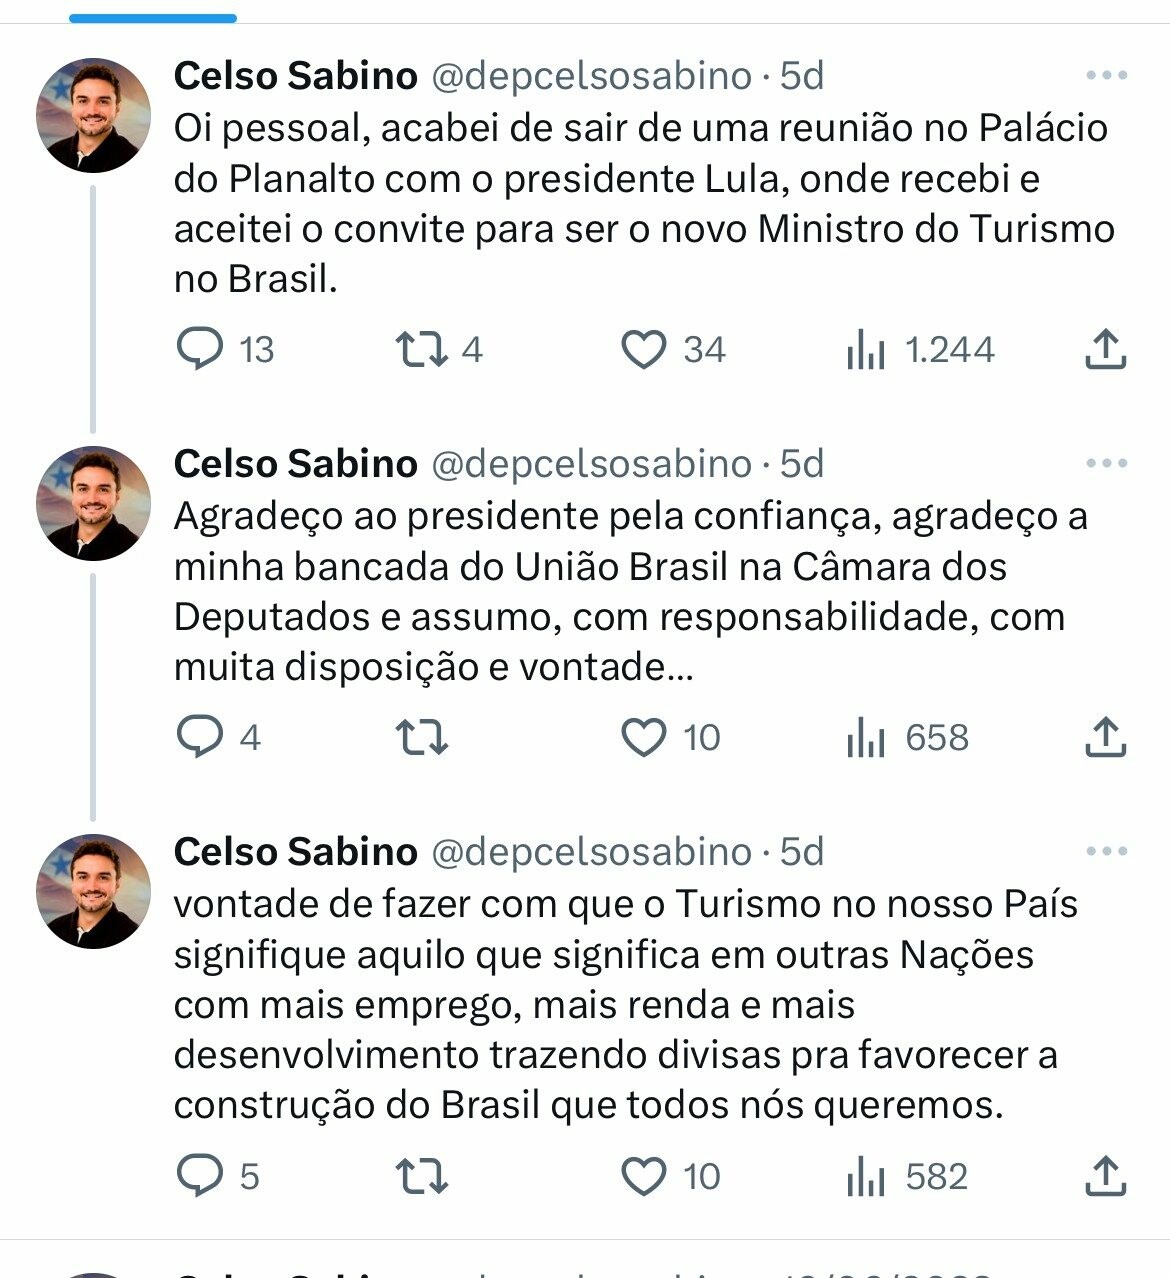 Sabino commented that he intends to develop the sector by bringing in foreign exchange for Brazil 